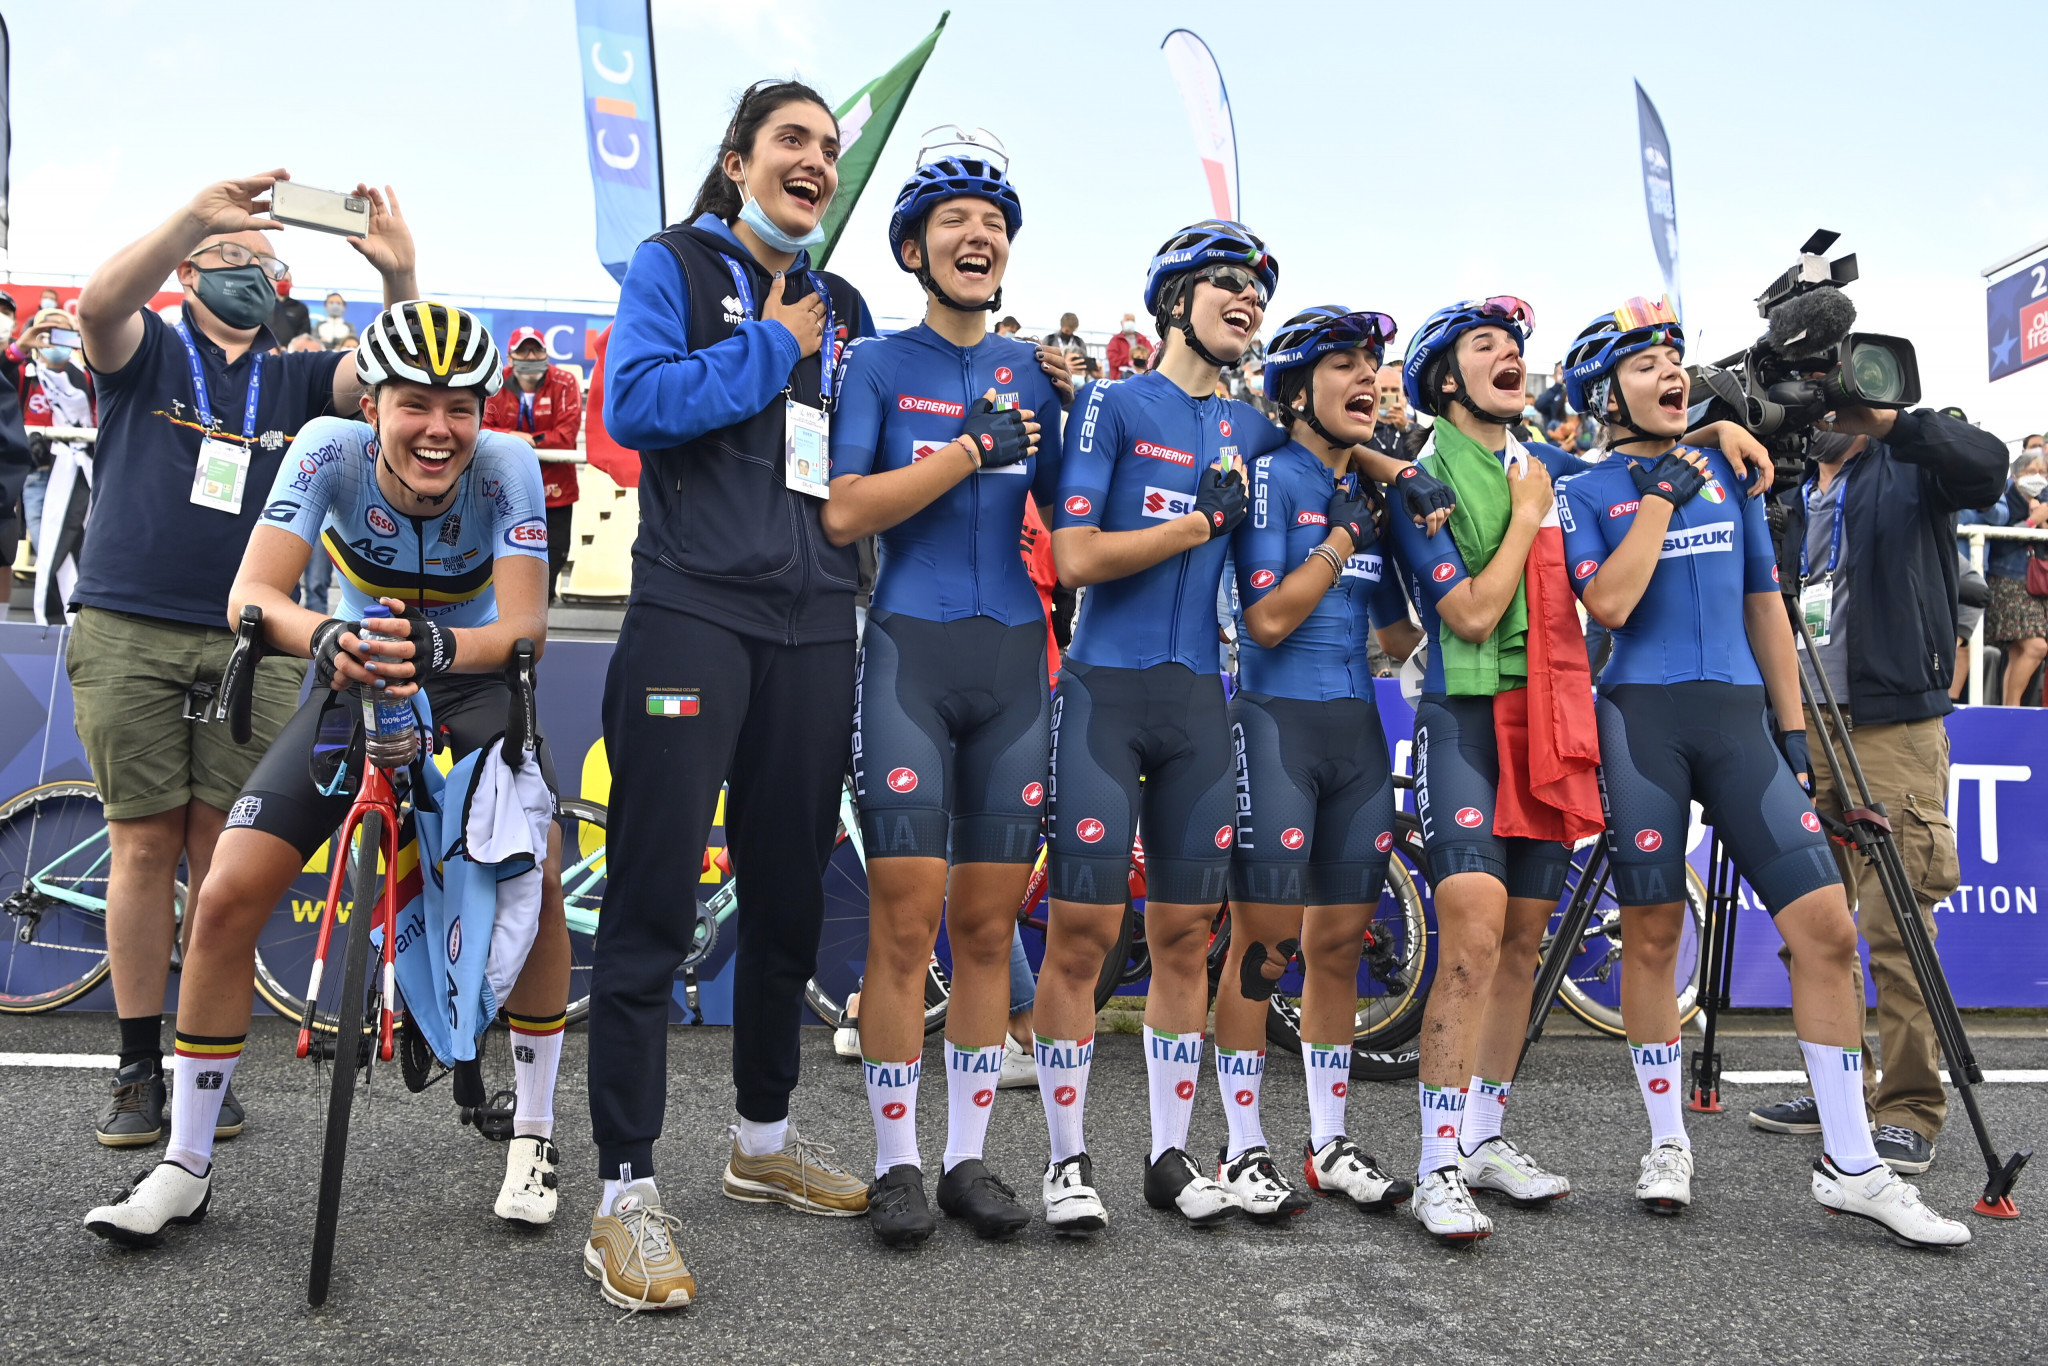 The UEC Road European Championships concluded in Plouay ©Getty Images